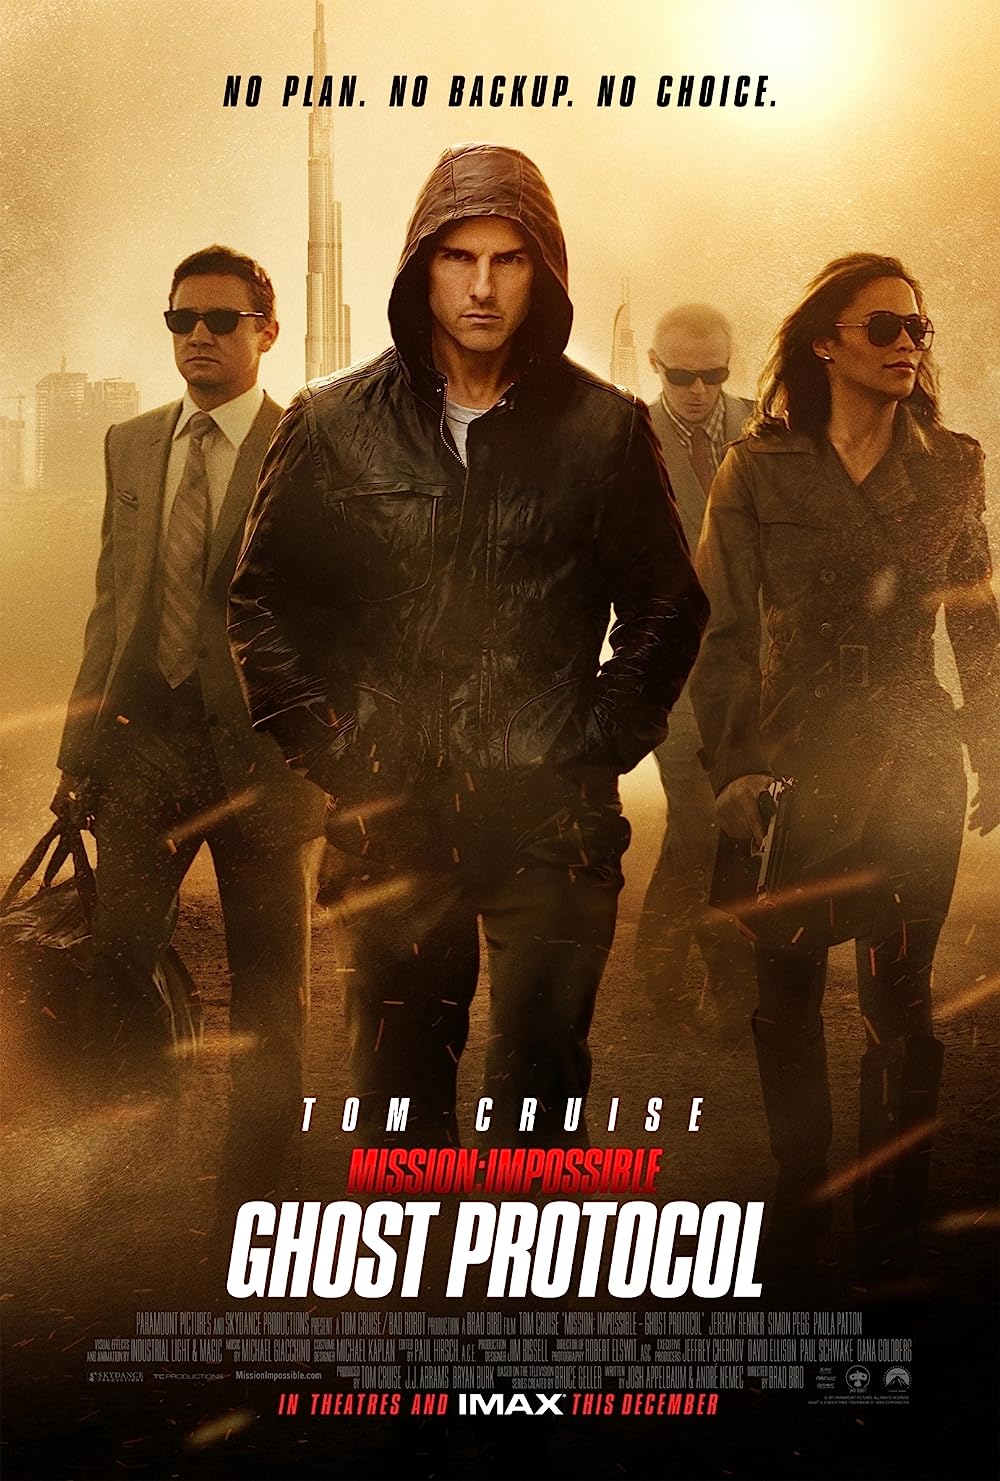 Mission Impossible Ghost Protocol (2011)